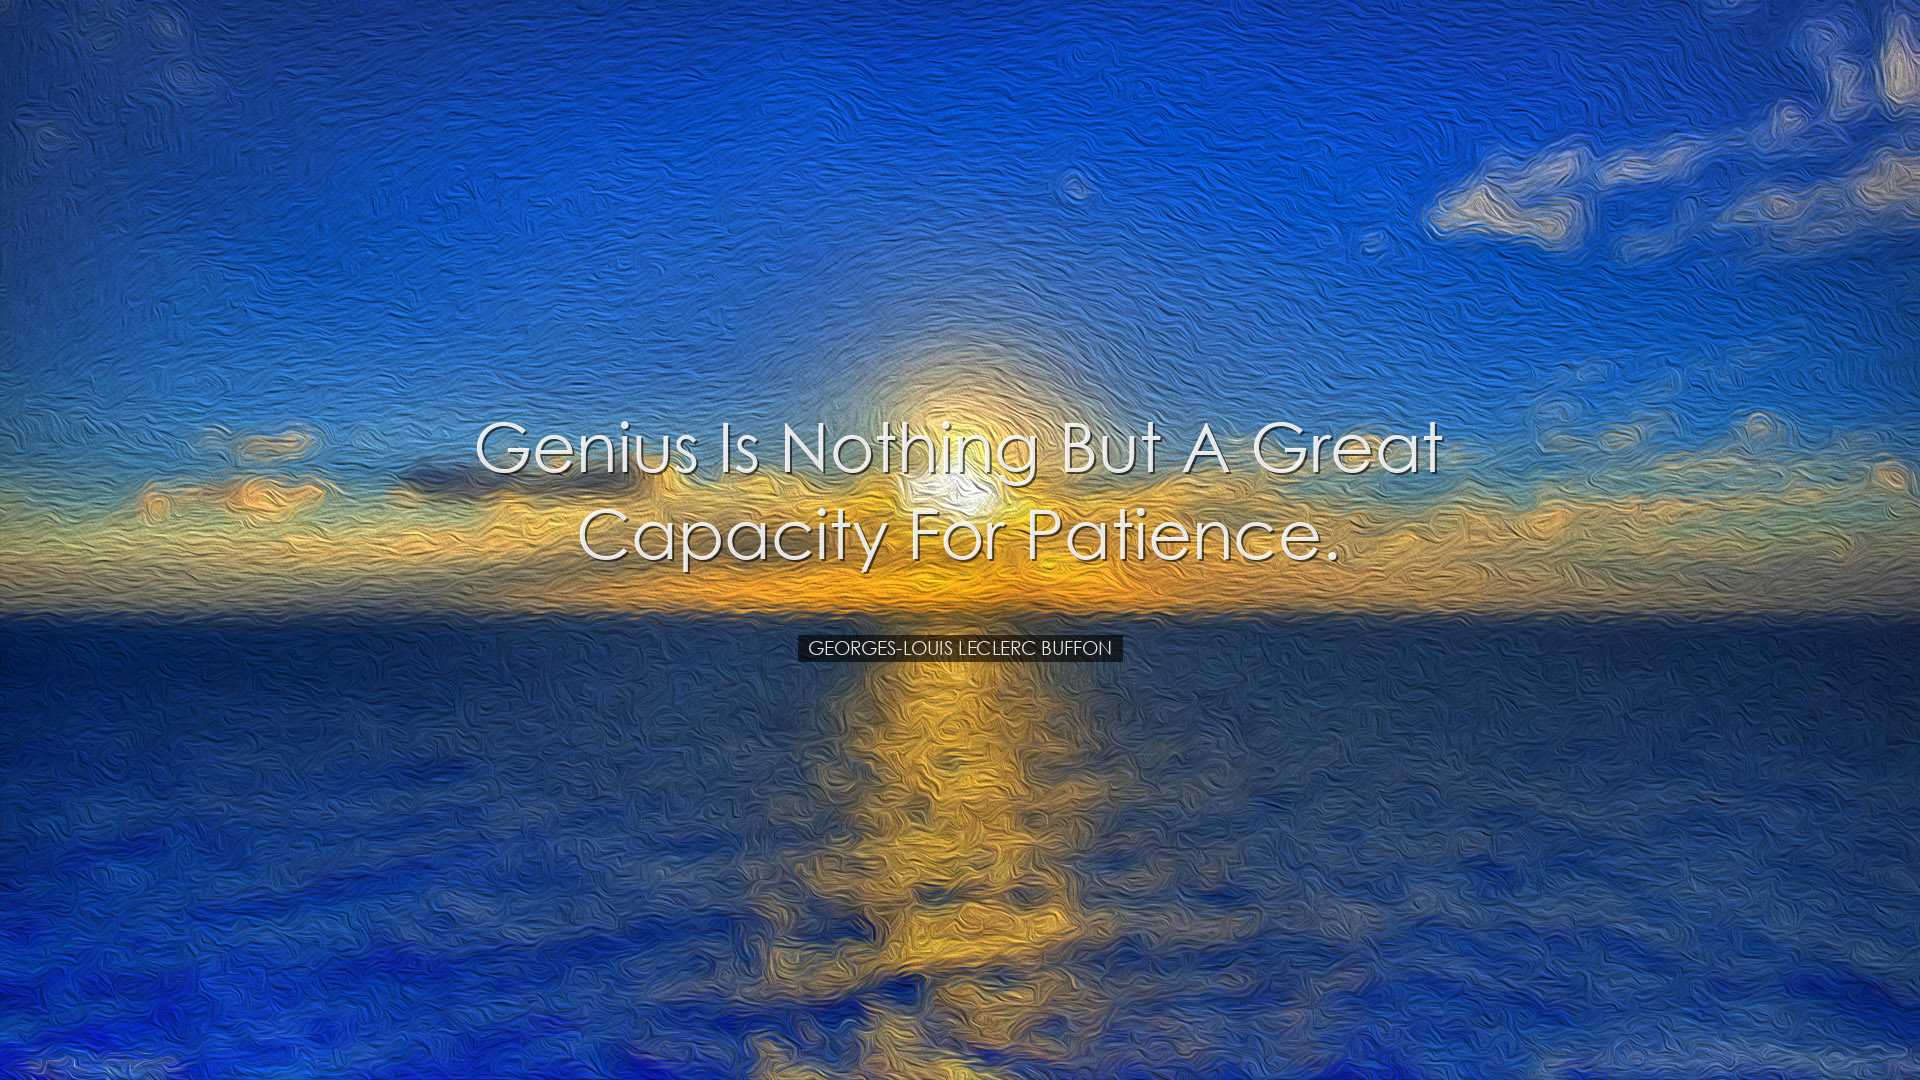 Genius is nothing but a great capacity for patience. - Georges-Lou